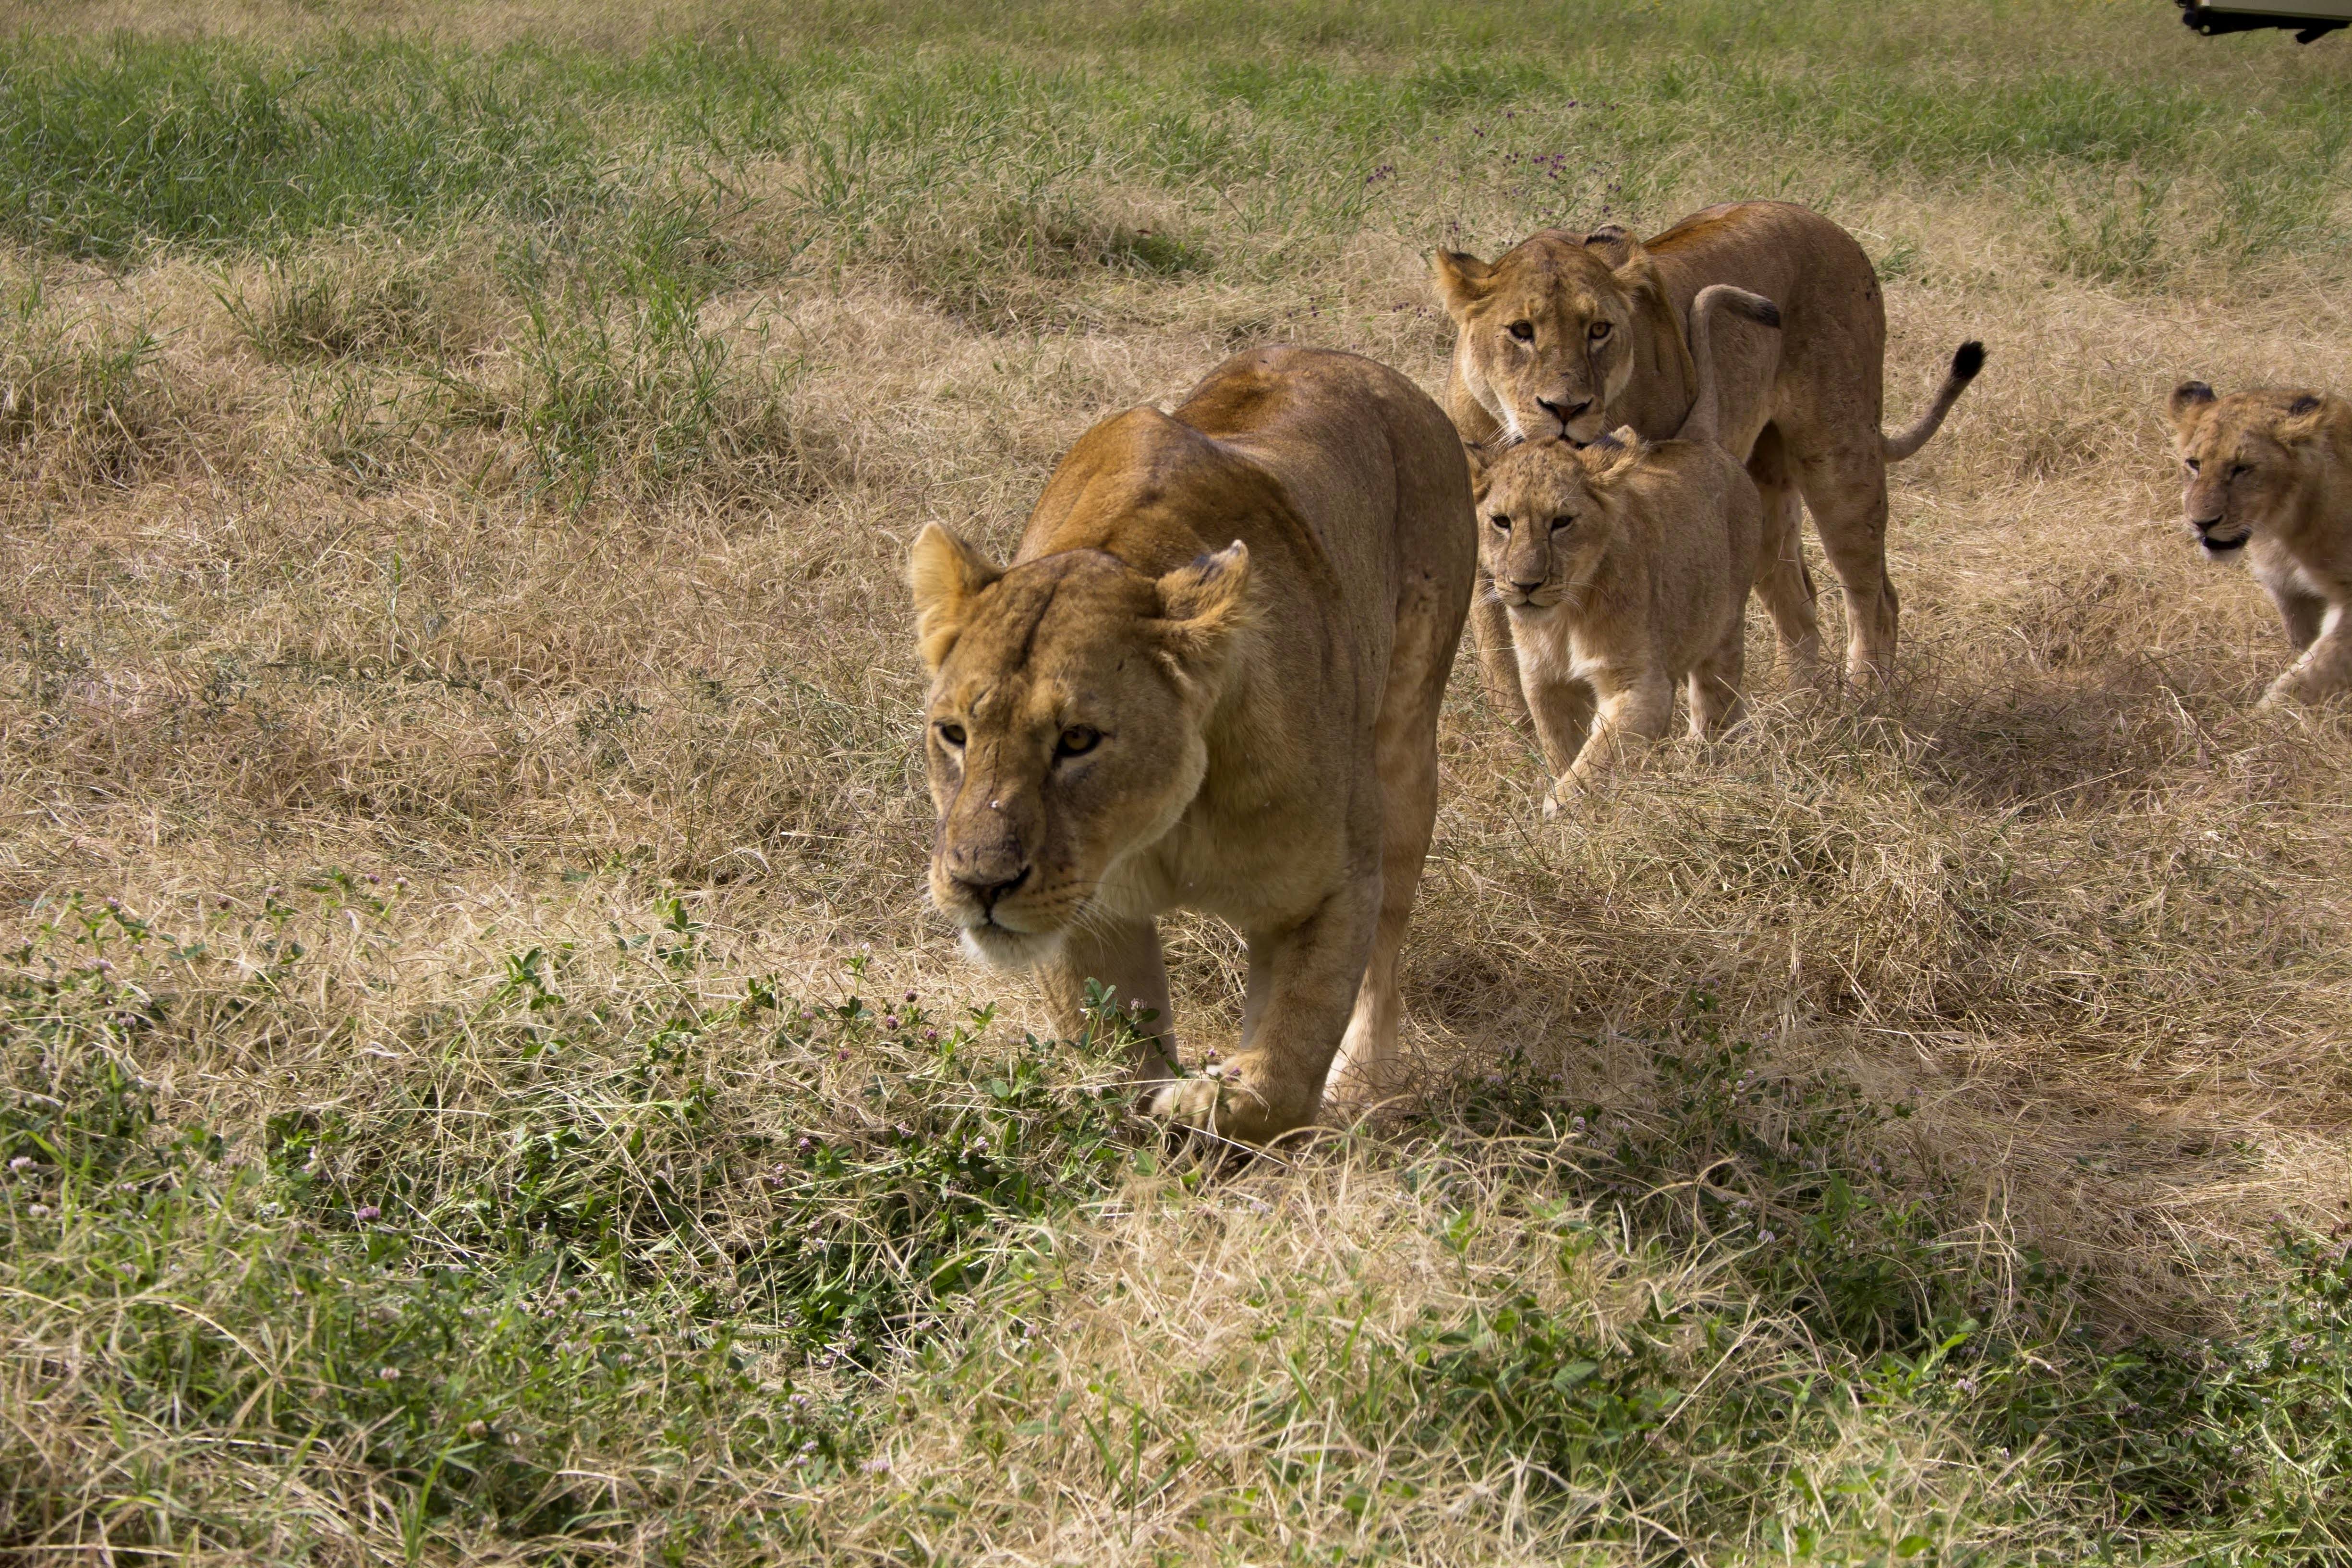 Lions and their cubs during the safari